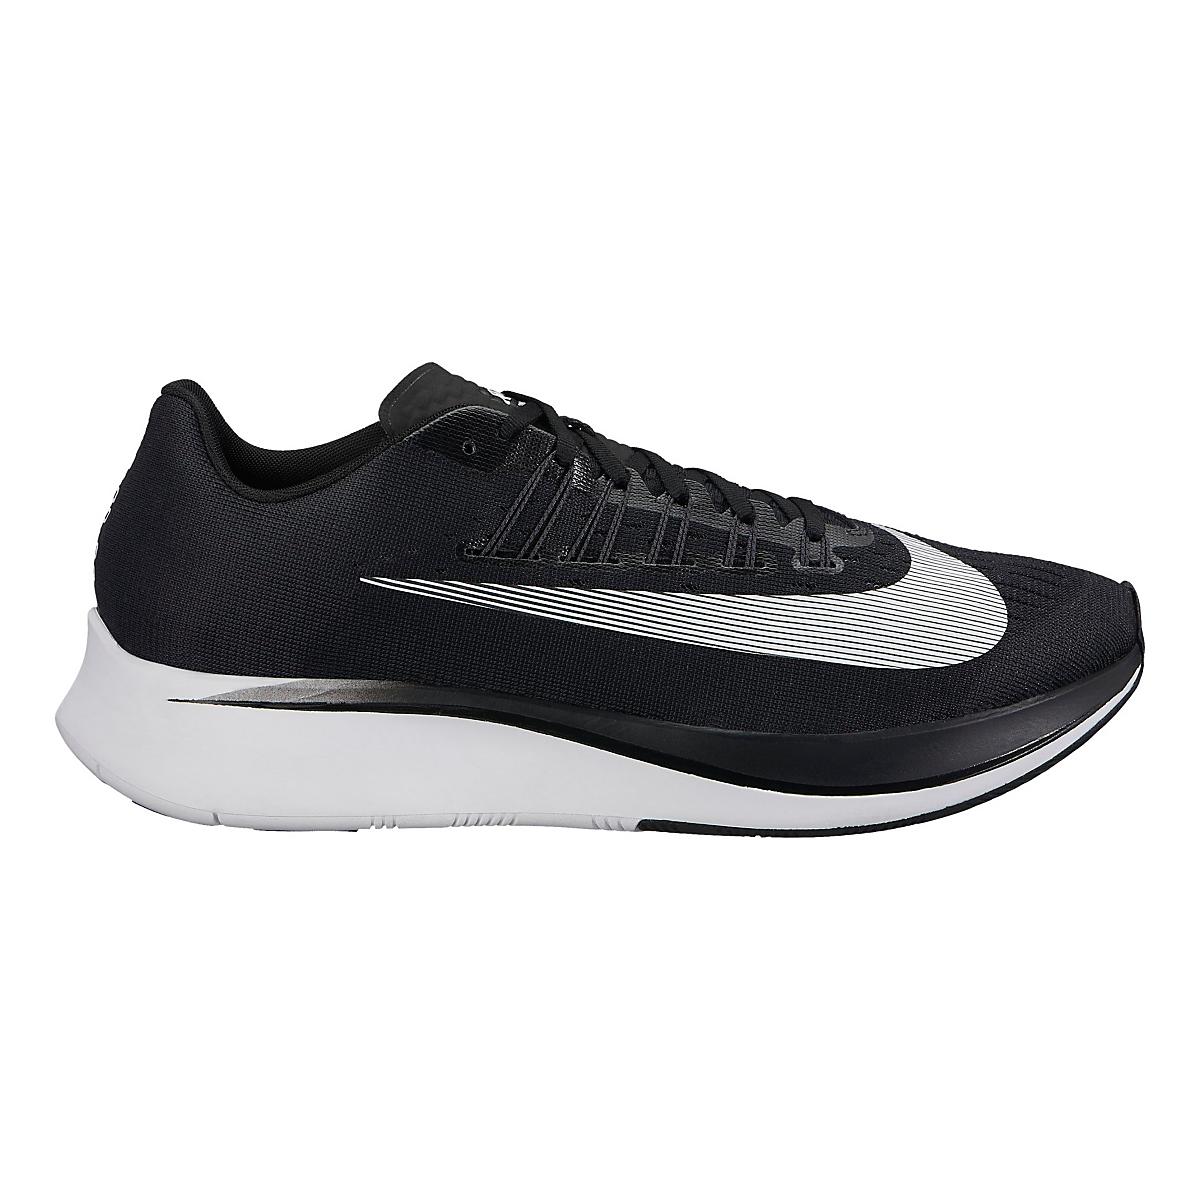 Mens Nike Zoom Fly Running Shoe at Road Runner Sports